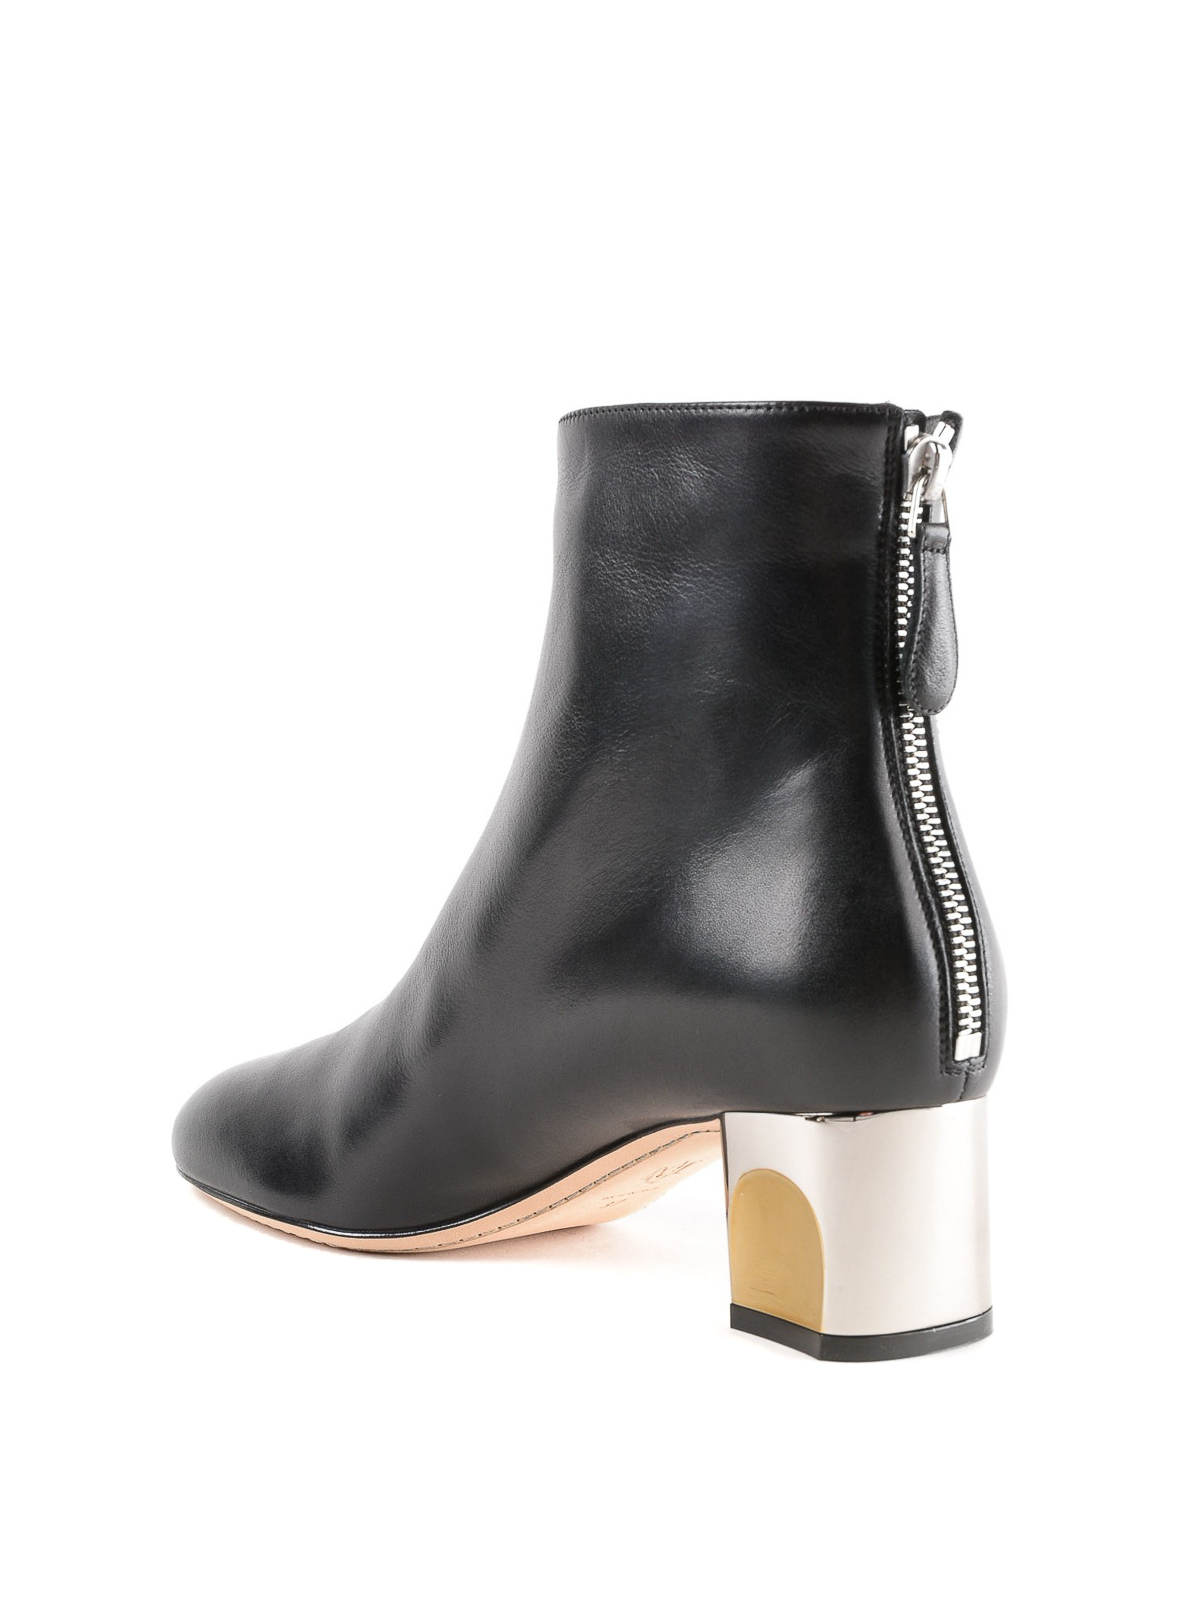 Ankle boots Alexander Mcqueen - Metal heel black leather ankle ...